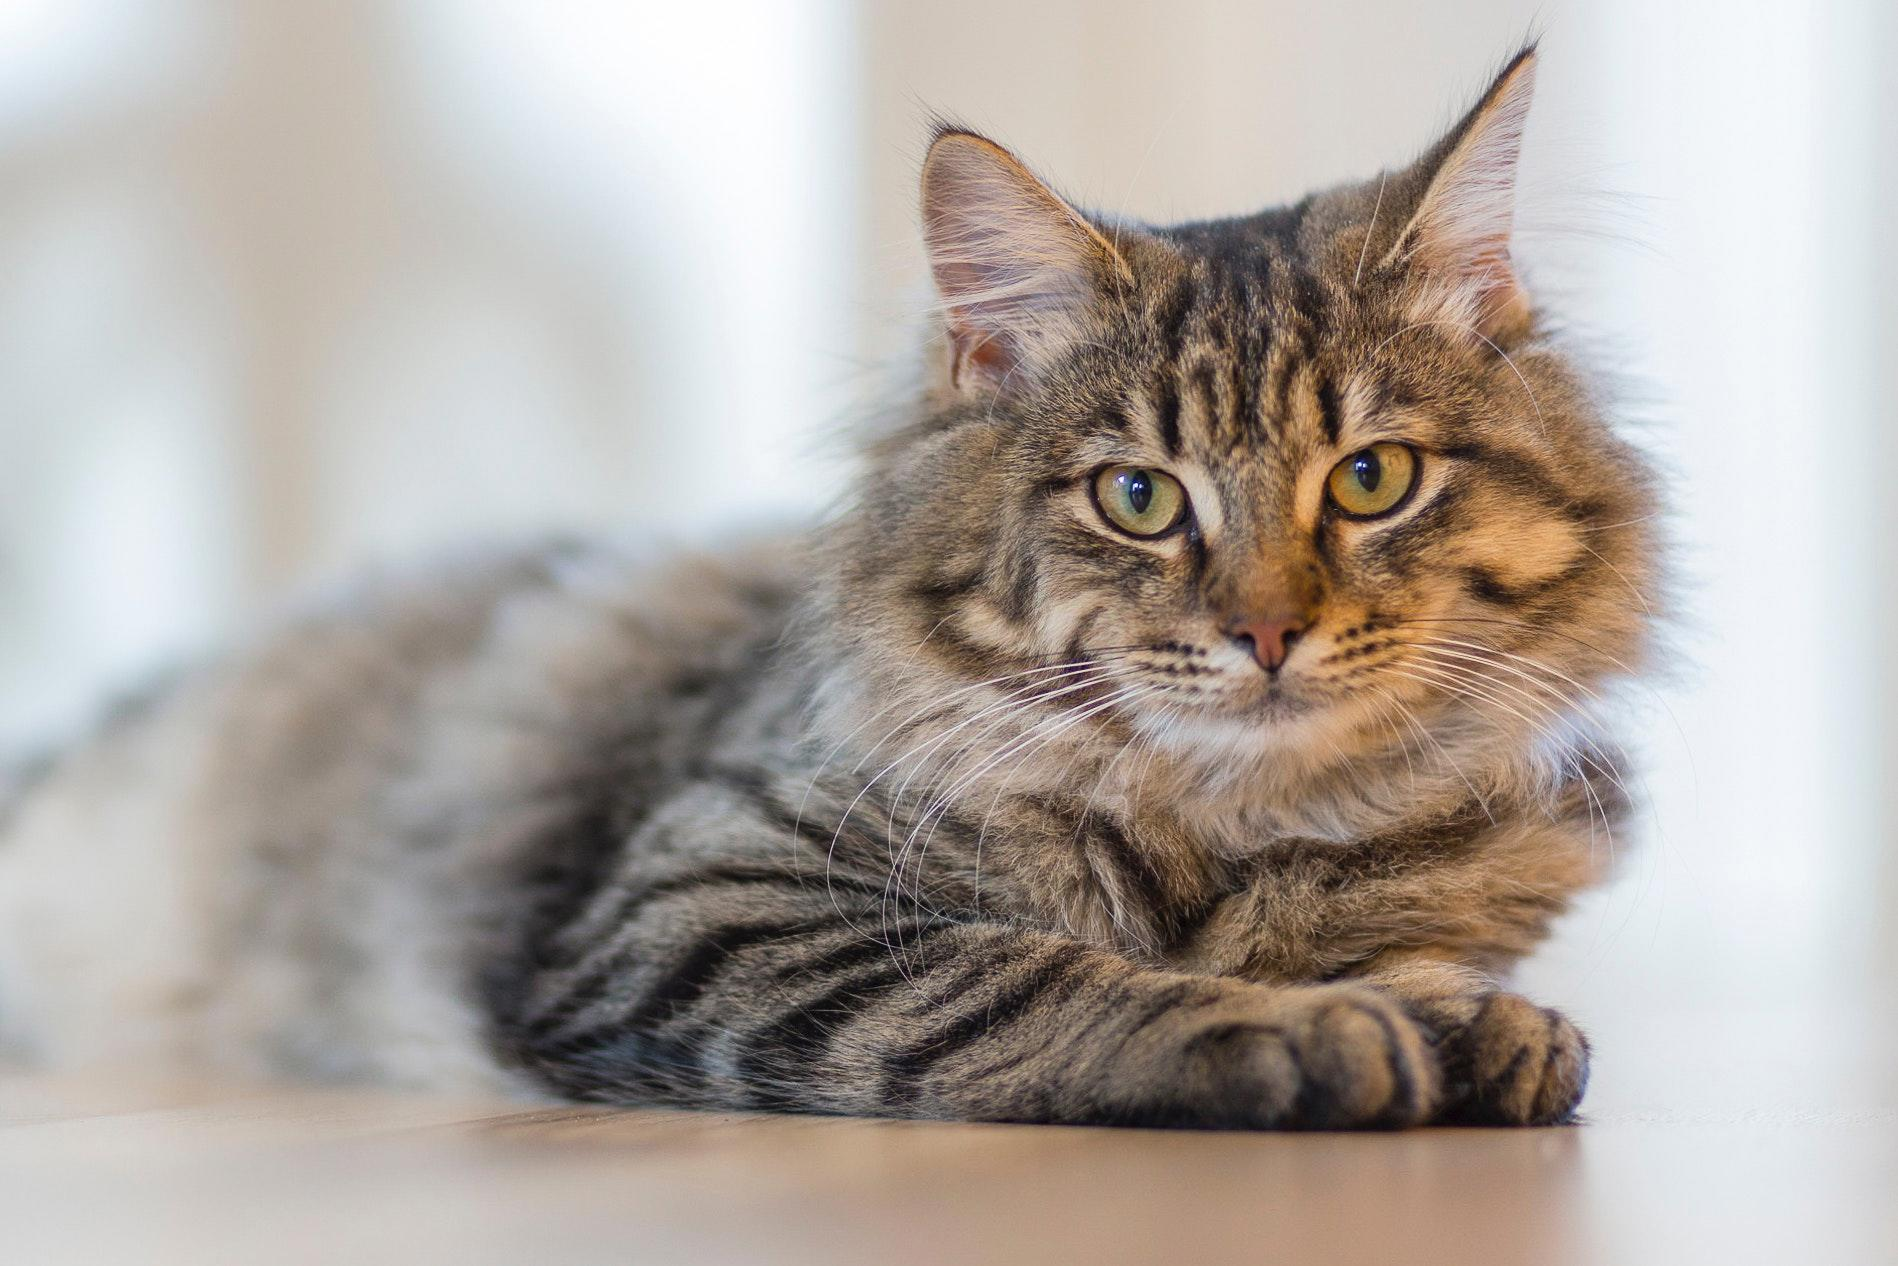 Training Your Cat to Love the Scratching Post: Tips for Keeping Your Furniture Safe